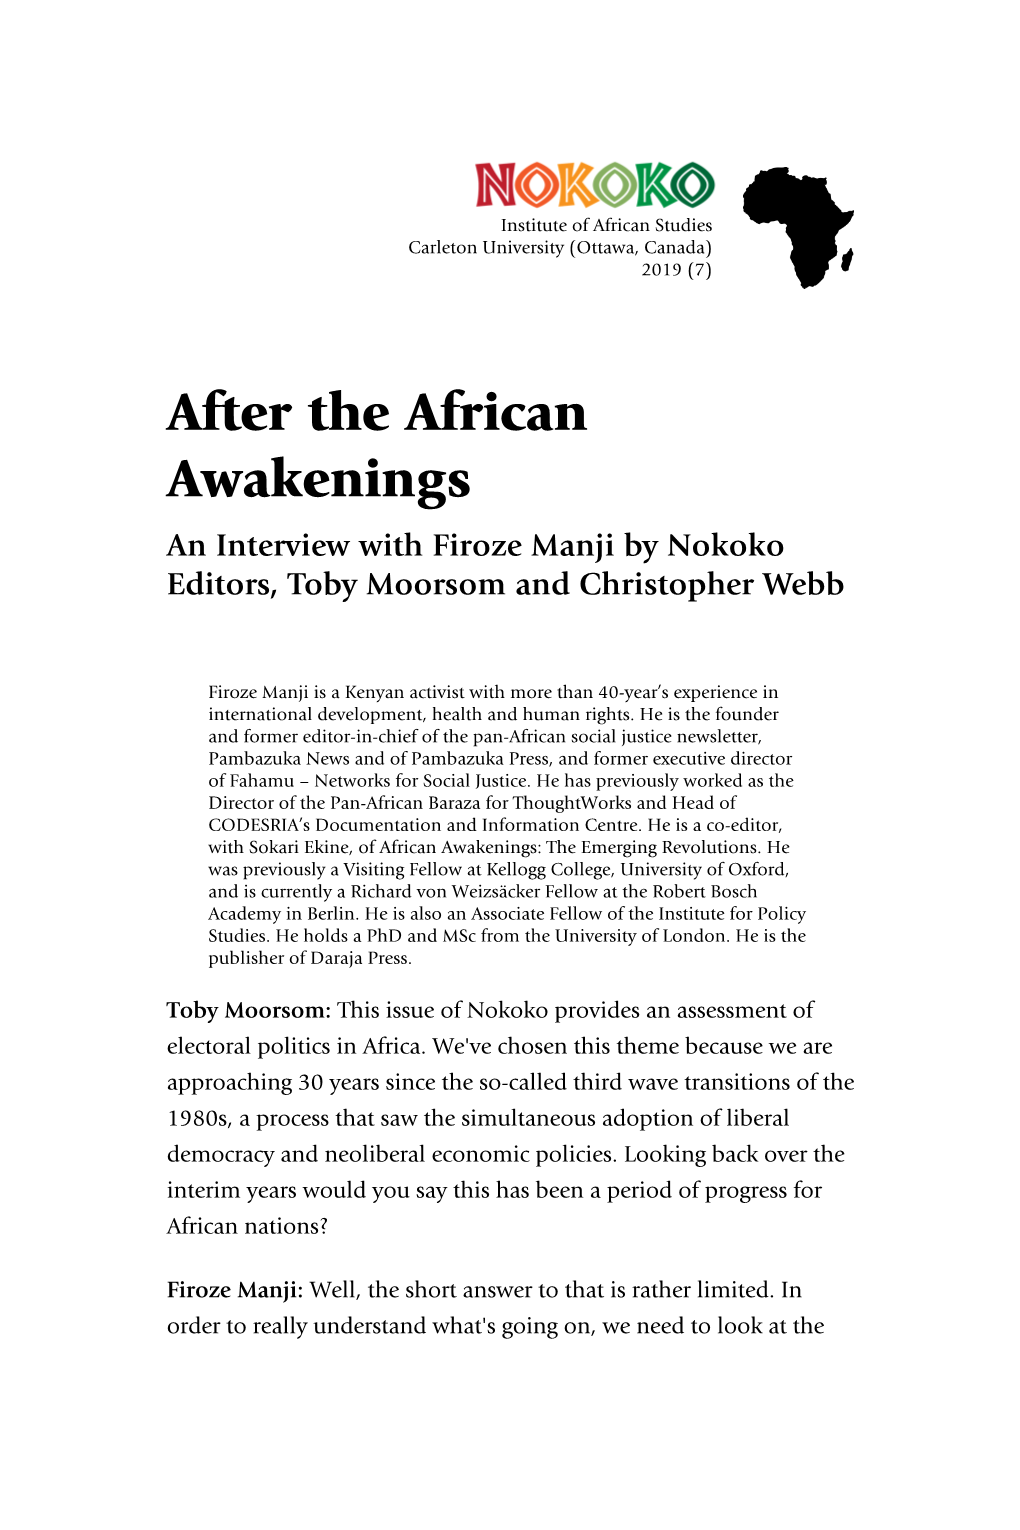 After the African Awakenings an Interview with Firoze Manji by Nokoko Editors, Toby Moorsom and Christopher Webb